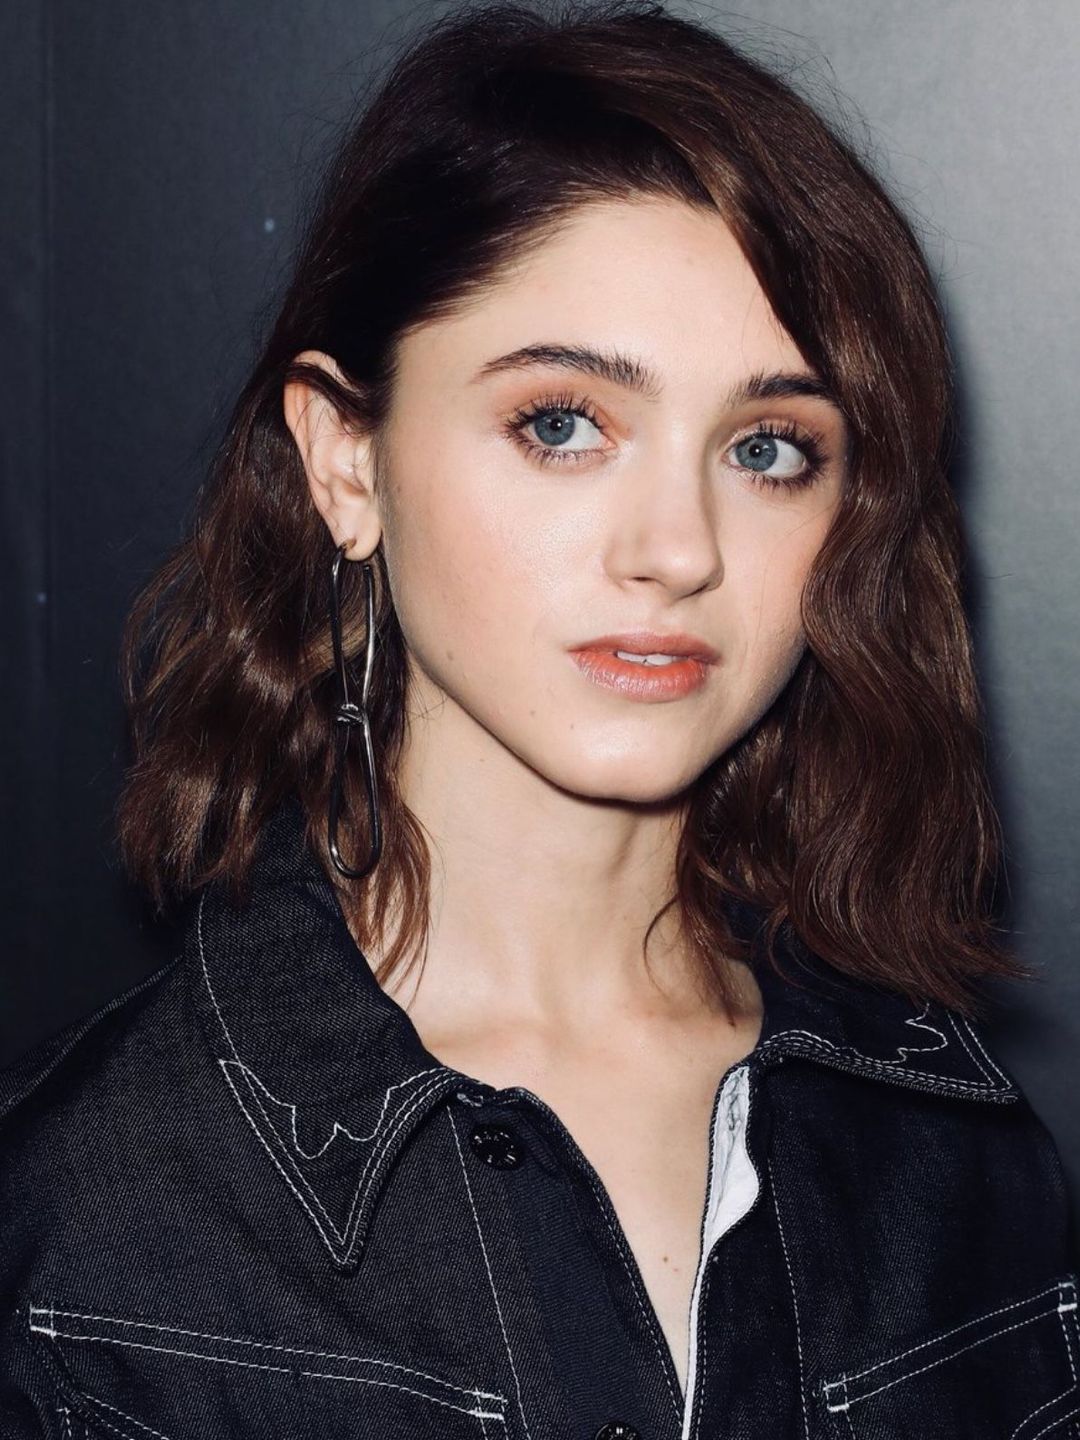 Natalia Dyer who is her father